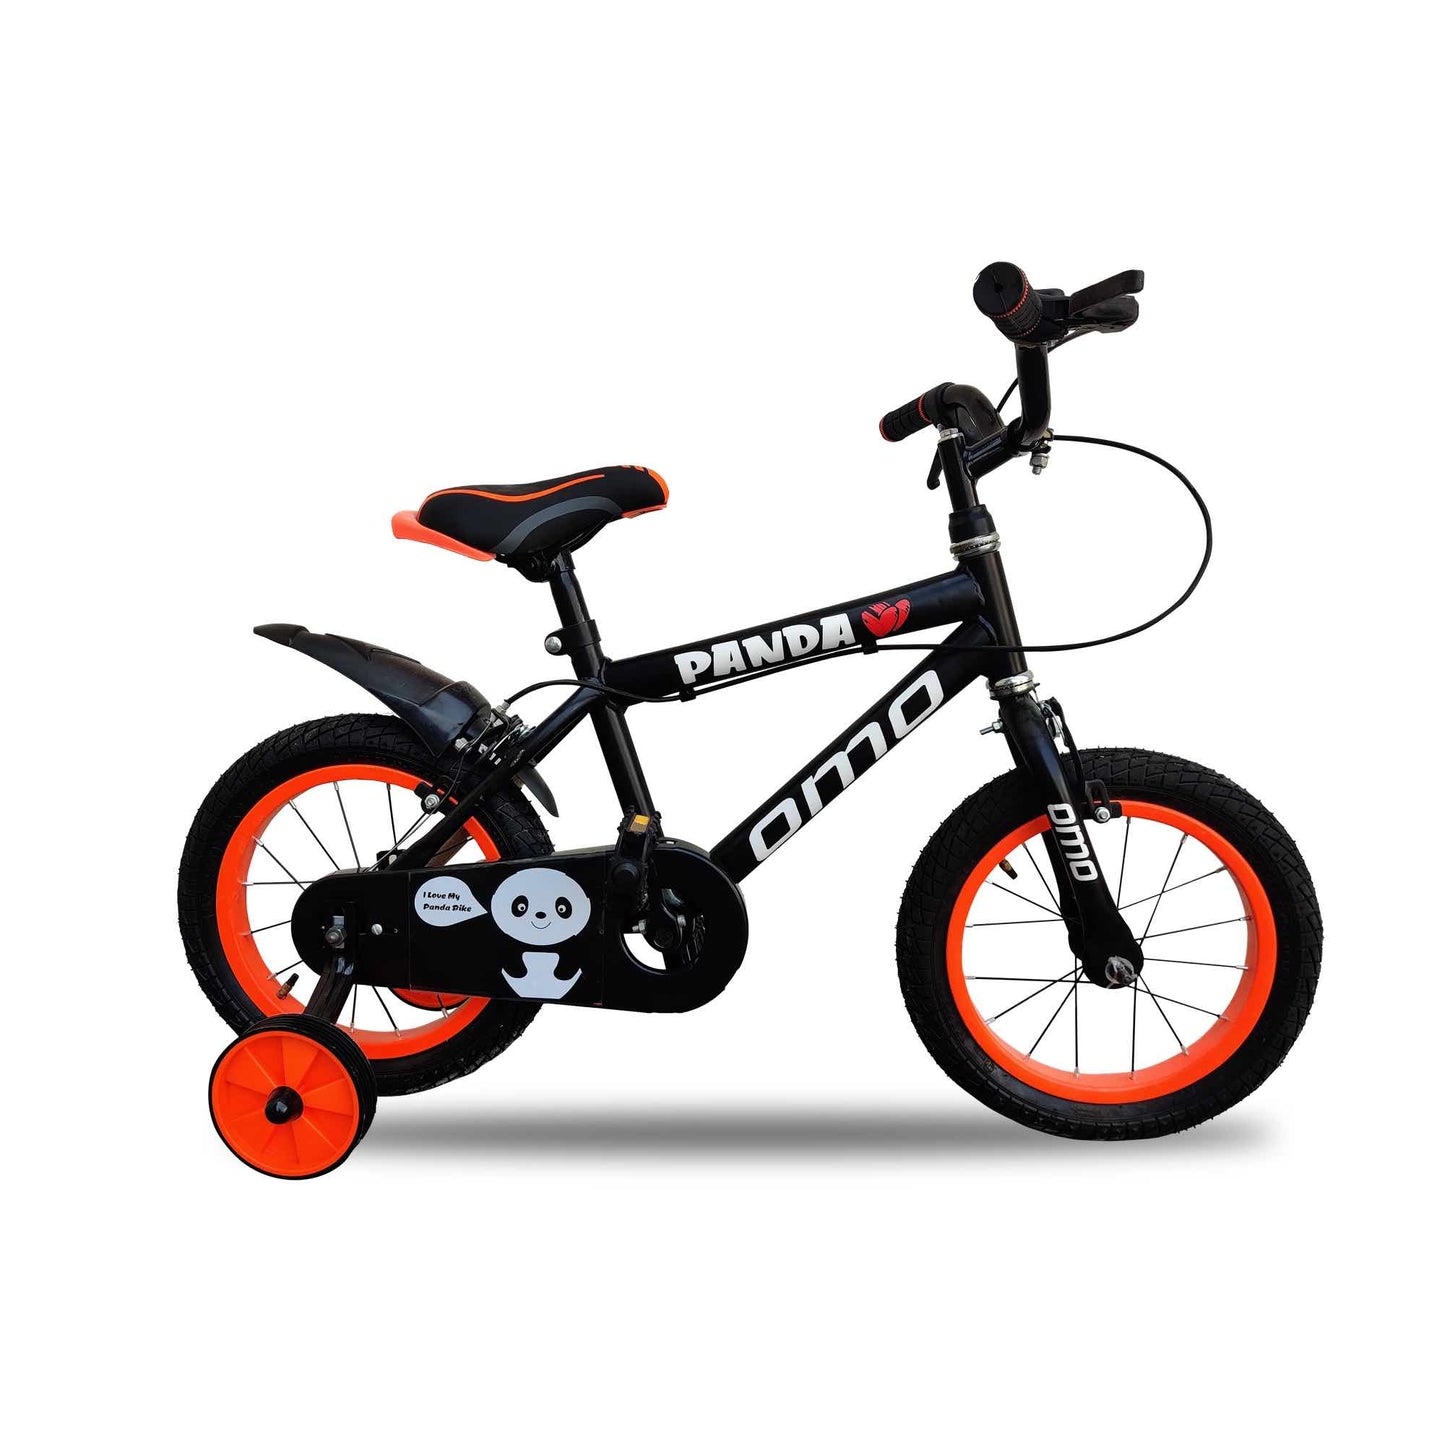 omobikes panda 14T kids cycle 3 to 5 year orange color